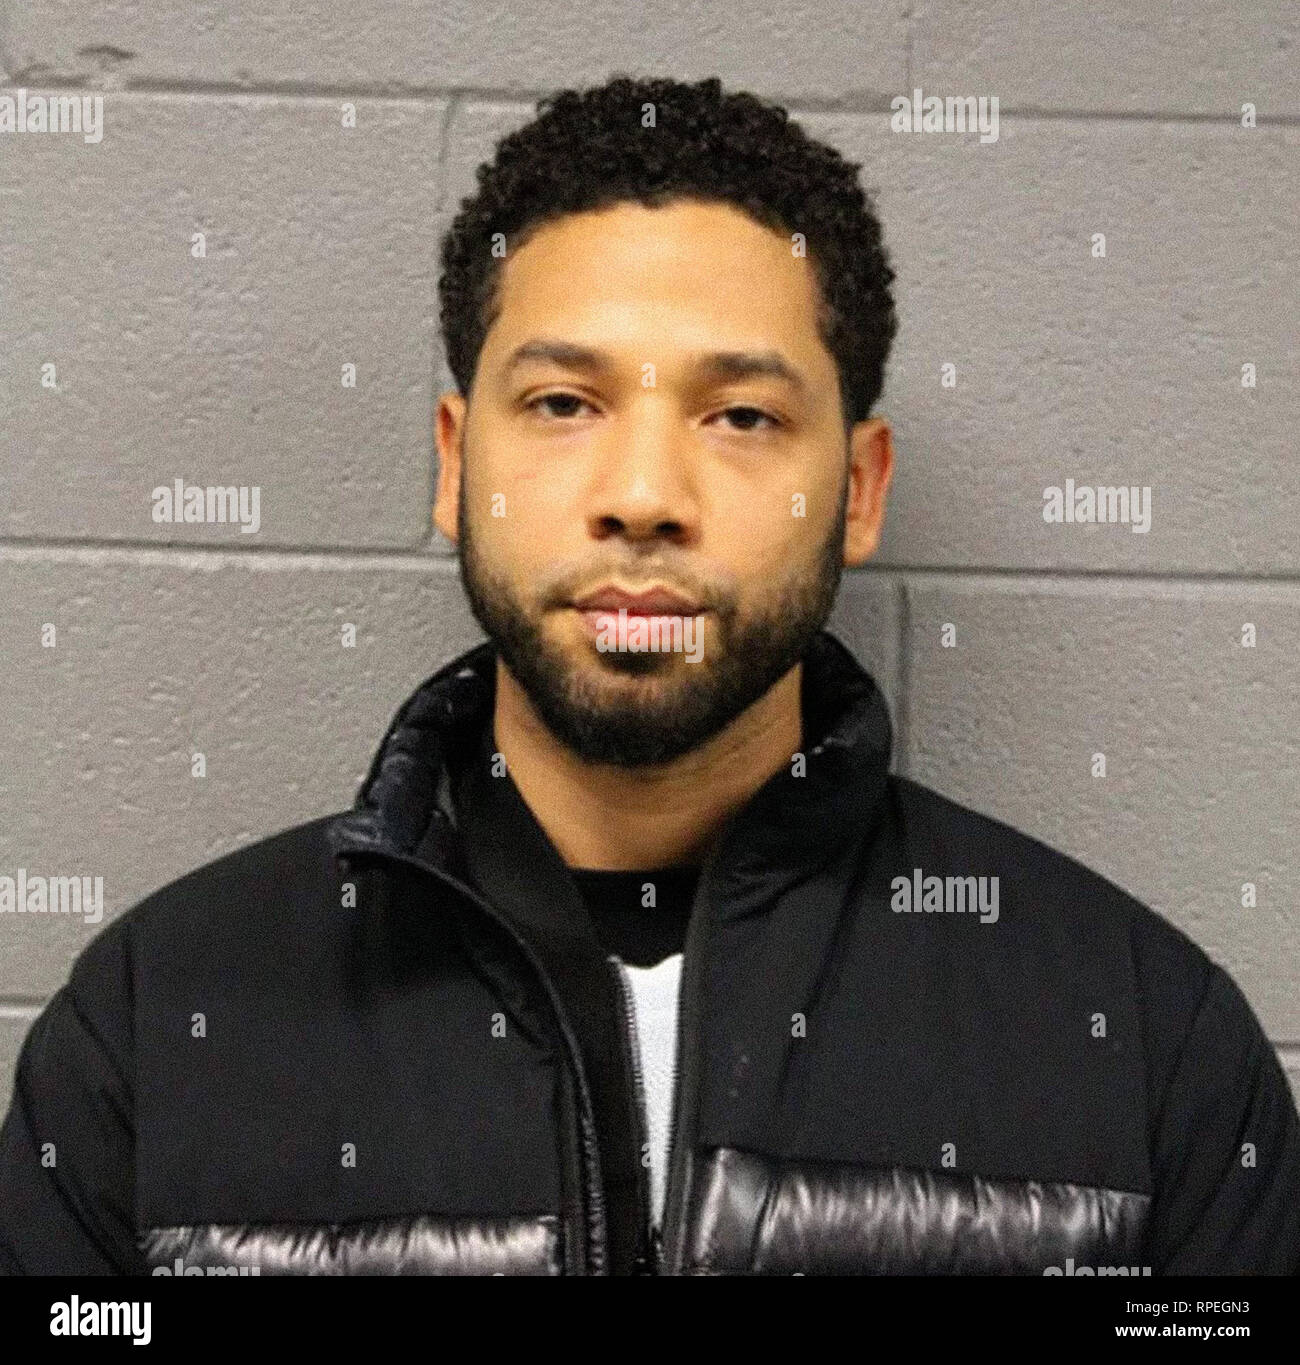 Police Mug Shot of Jussie Smollet. The 'Empire' star was charged Wednesday with the class four felony, which carries a sentence ranging from probation to up to three years in prison, according to Chicago police and the Cook County state's attorney's office. February 21, 2019. Photo Credit: Chicago Police Via The Hollywood Archive Stock Photo